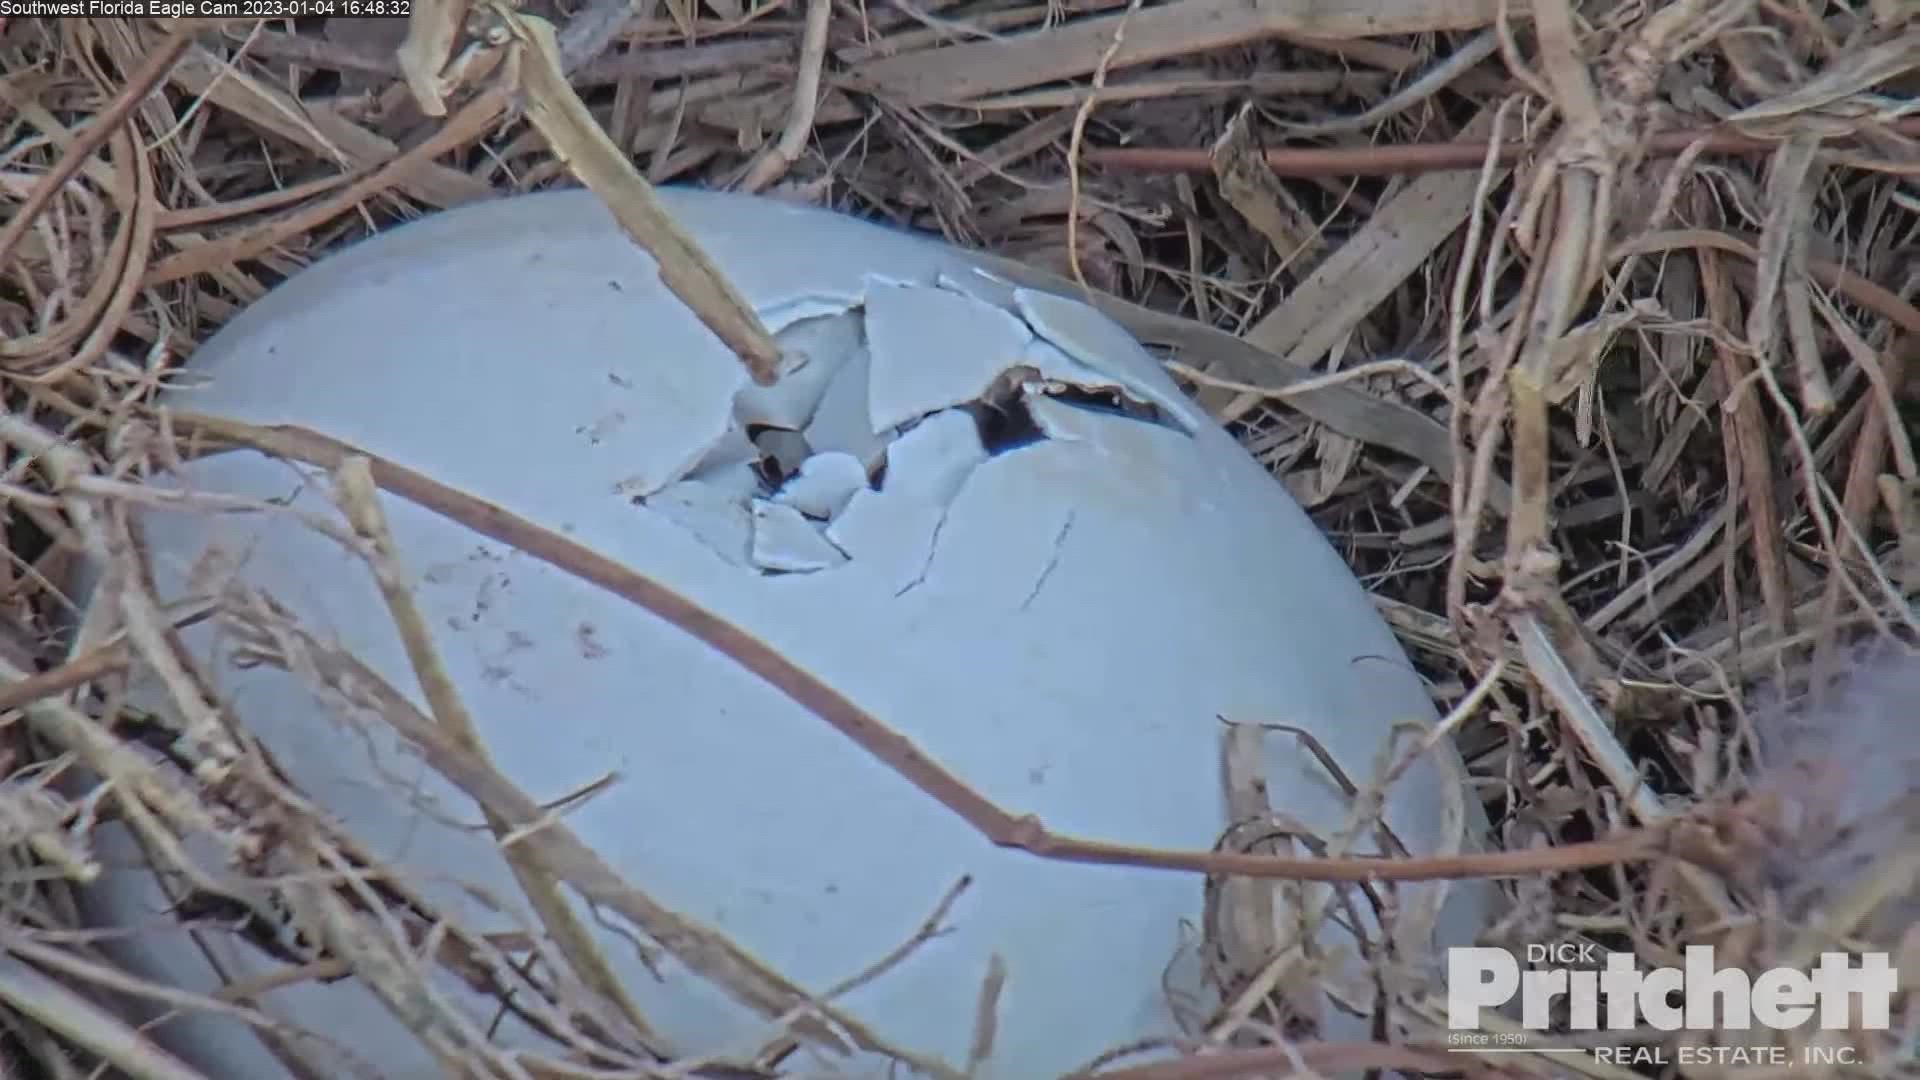 Early Tuesday morning, one of the eggs officially had its first crack, which means the hatching process has started (Courtesy: Southwest FL Eagle Cam).